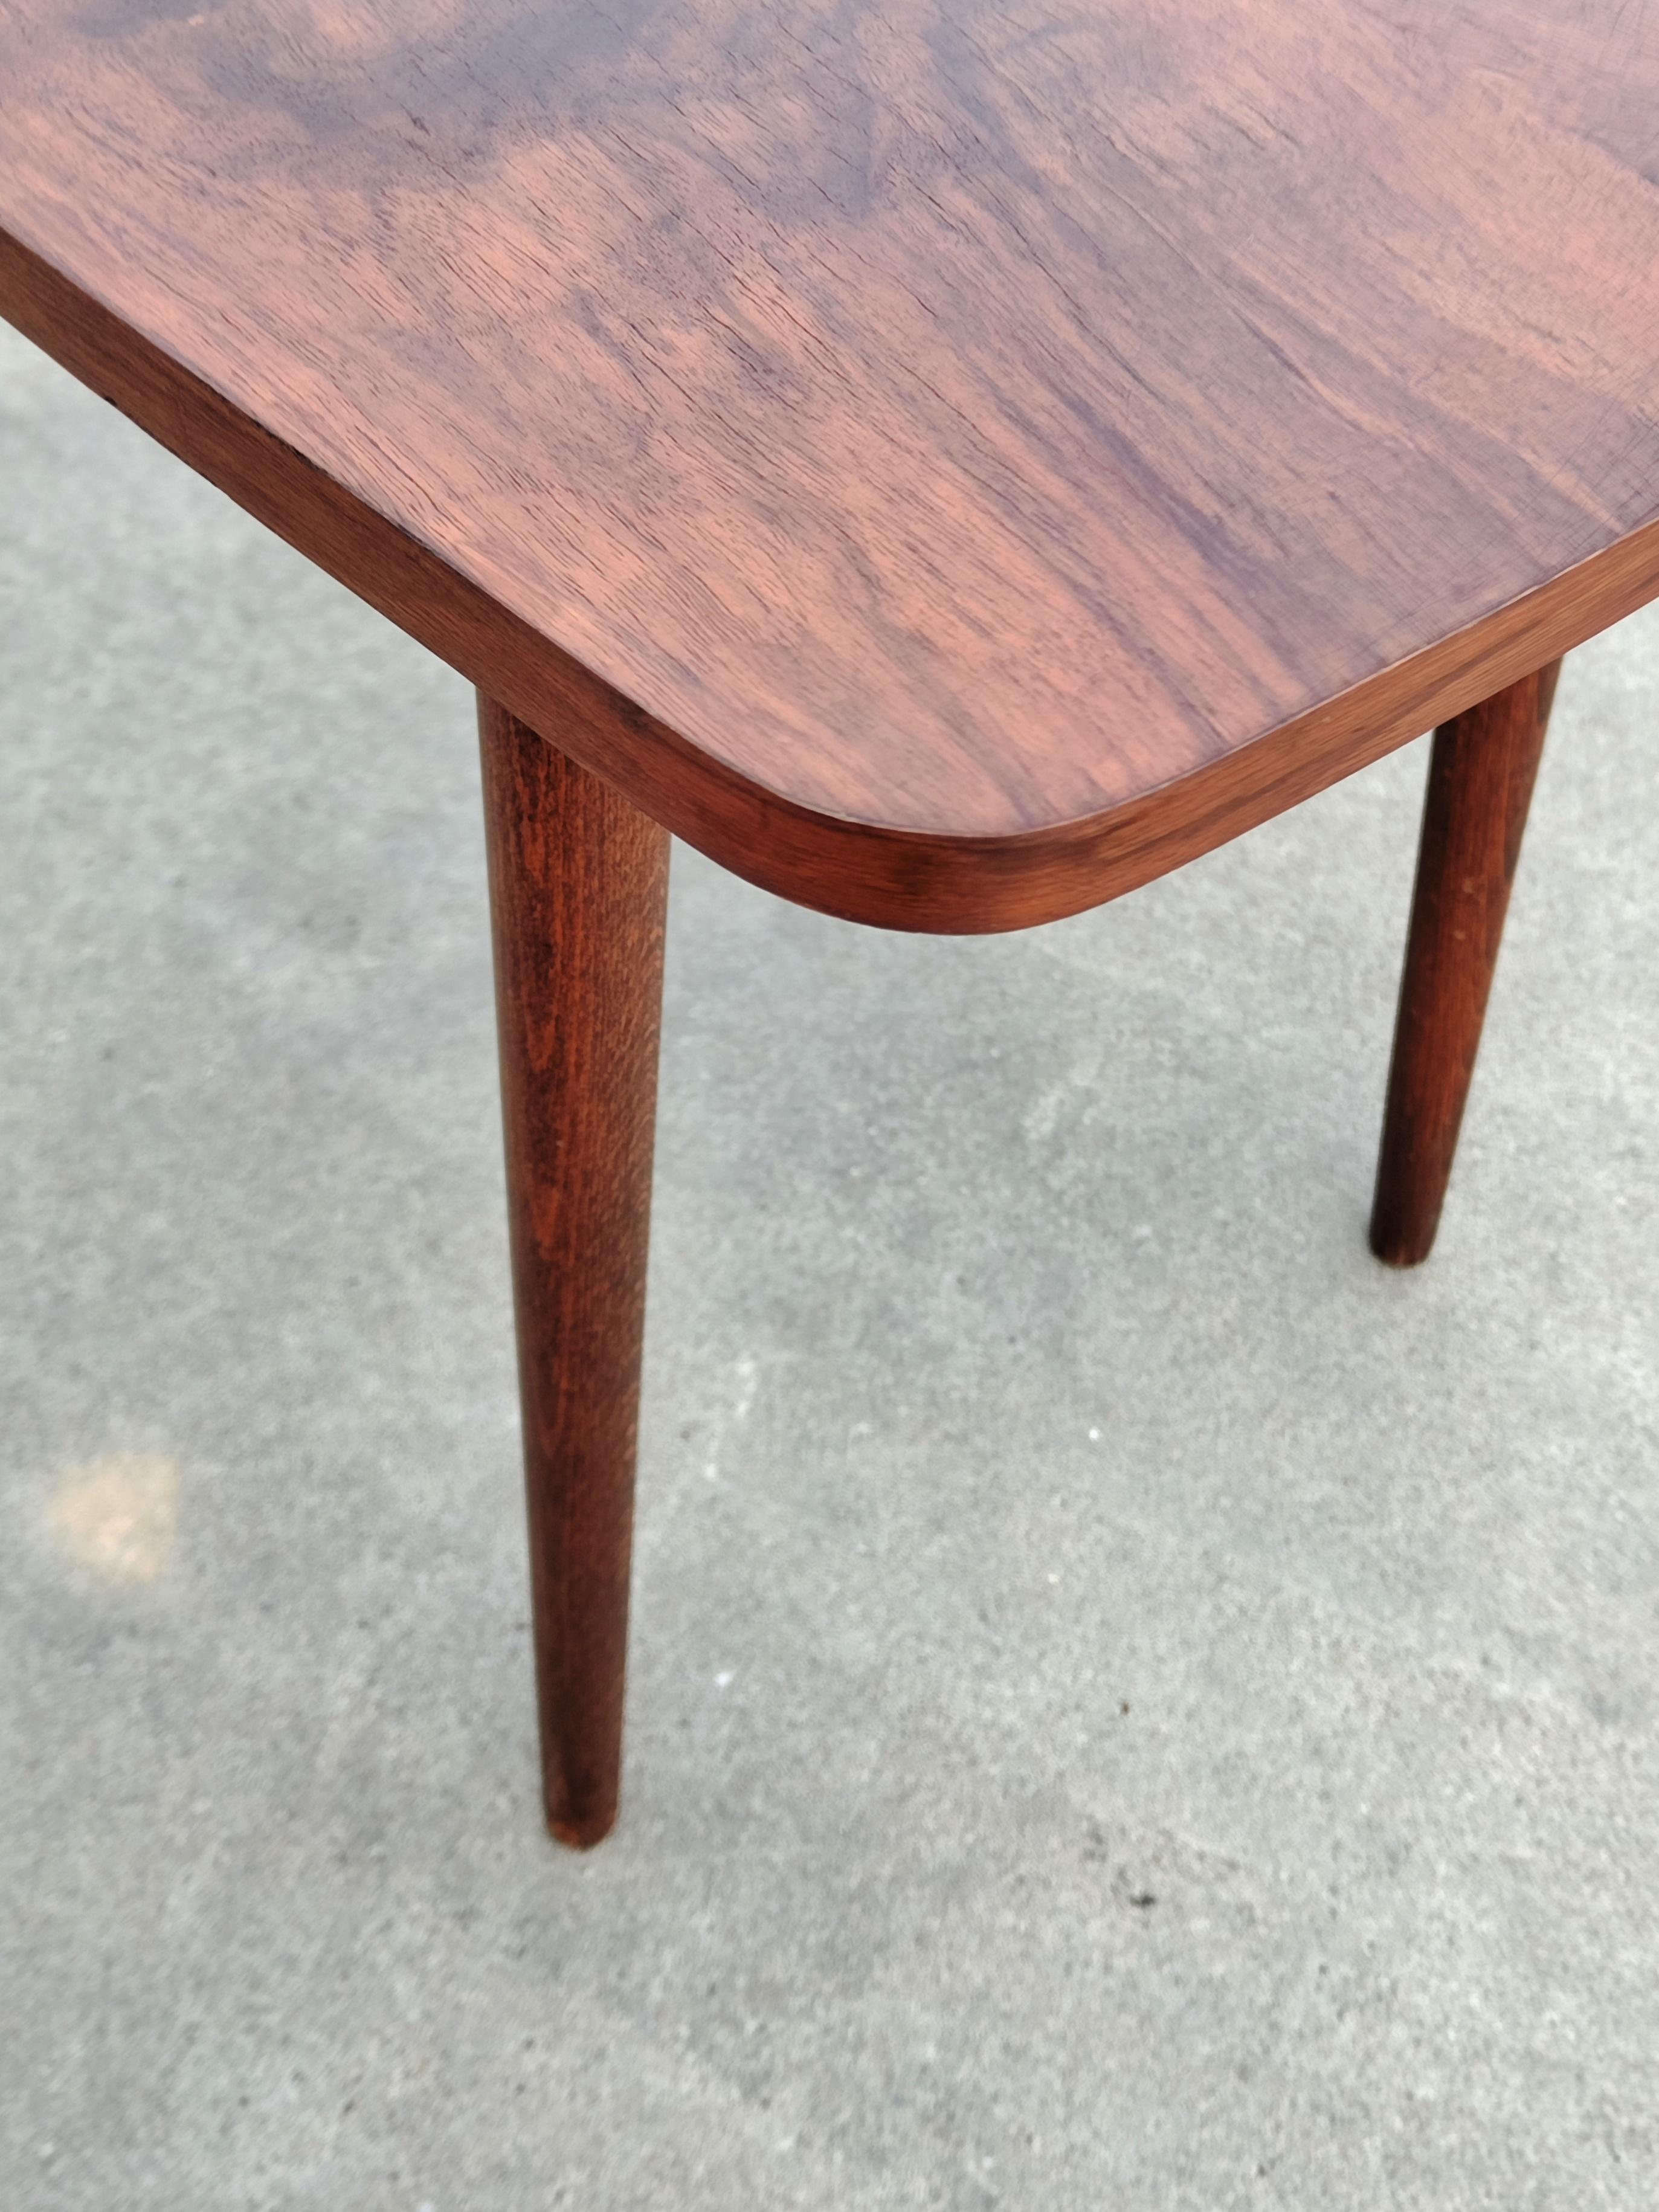 Mid-20th Century Small Mid-Century Modern Side Table with Walnut Veneer Top, Denmark 1960s For Sale